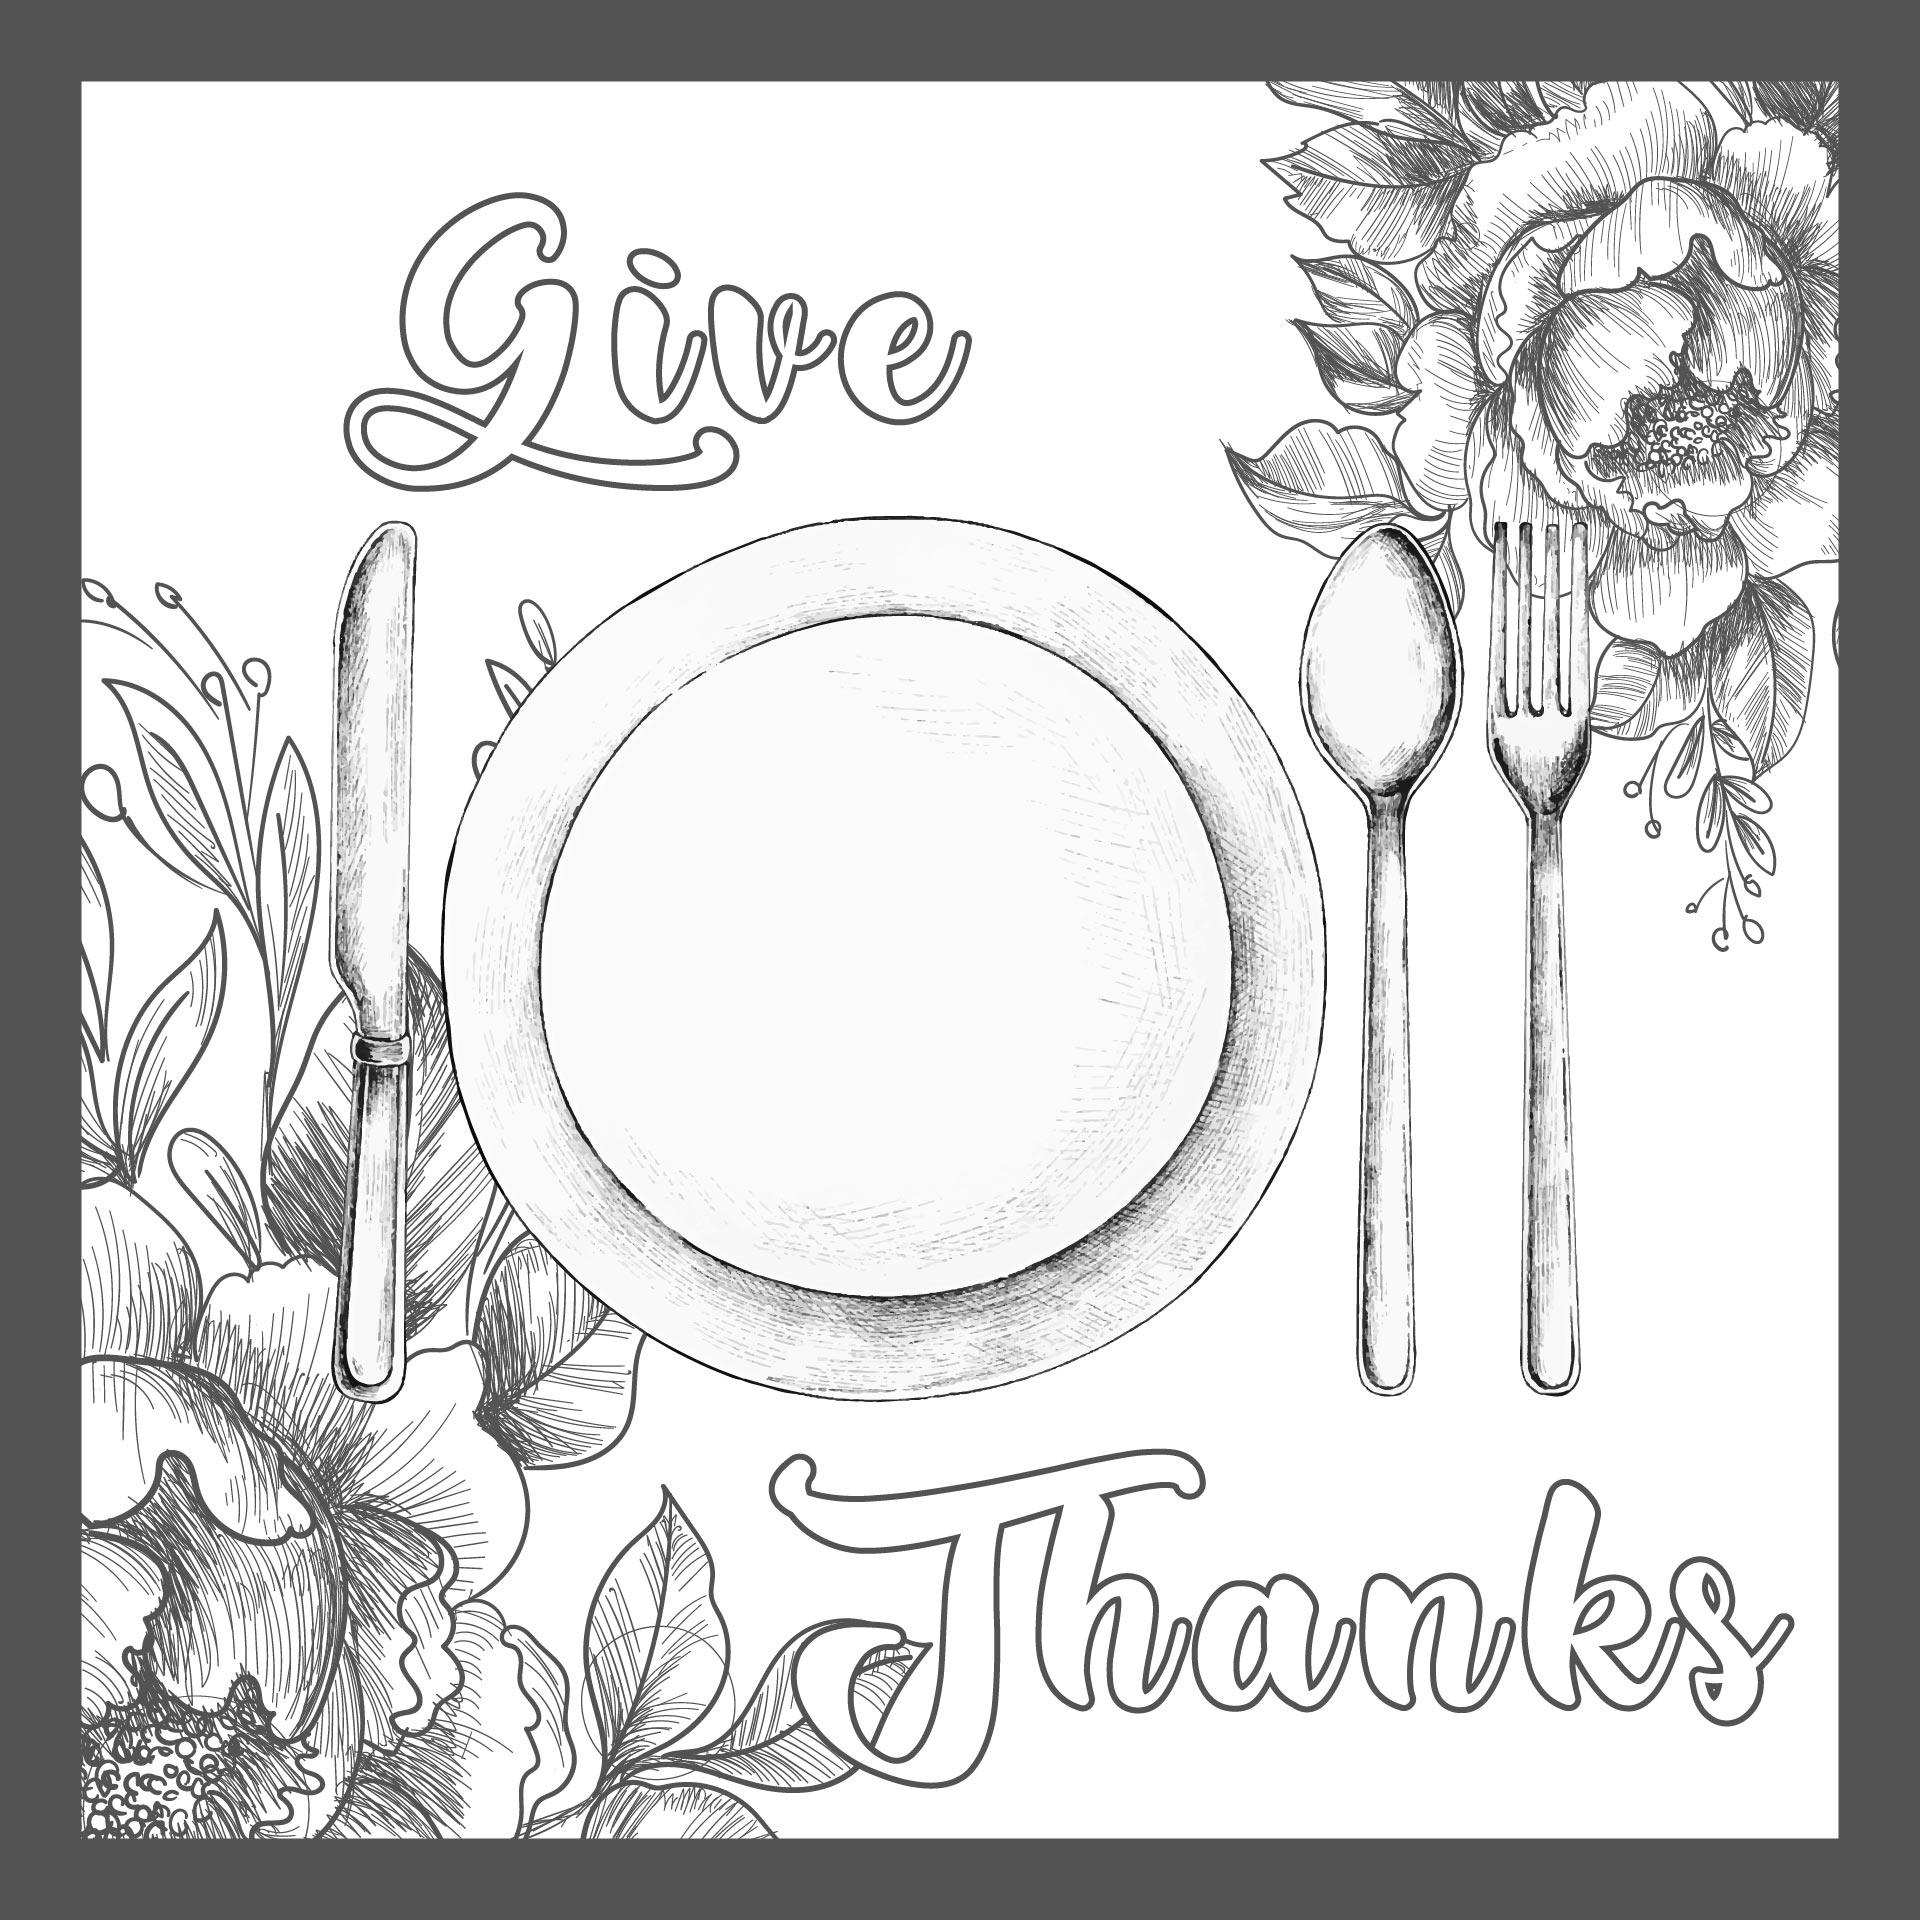 Printable Thanksgiving Placemats To Color